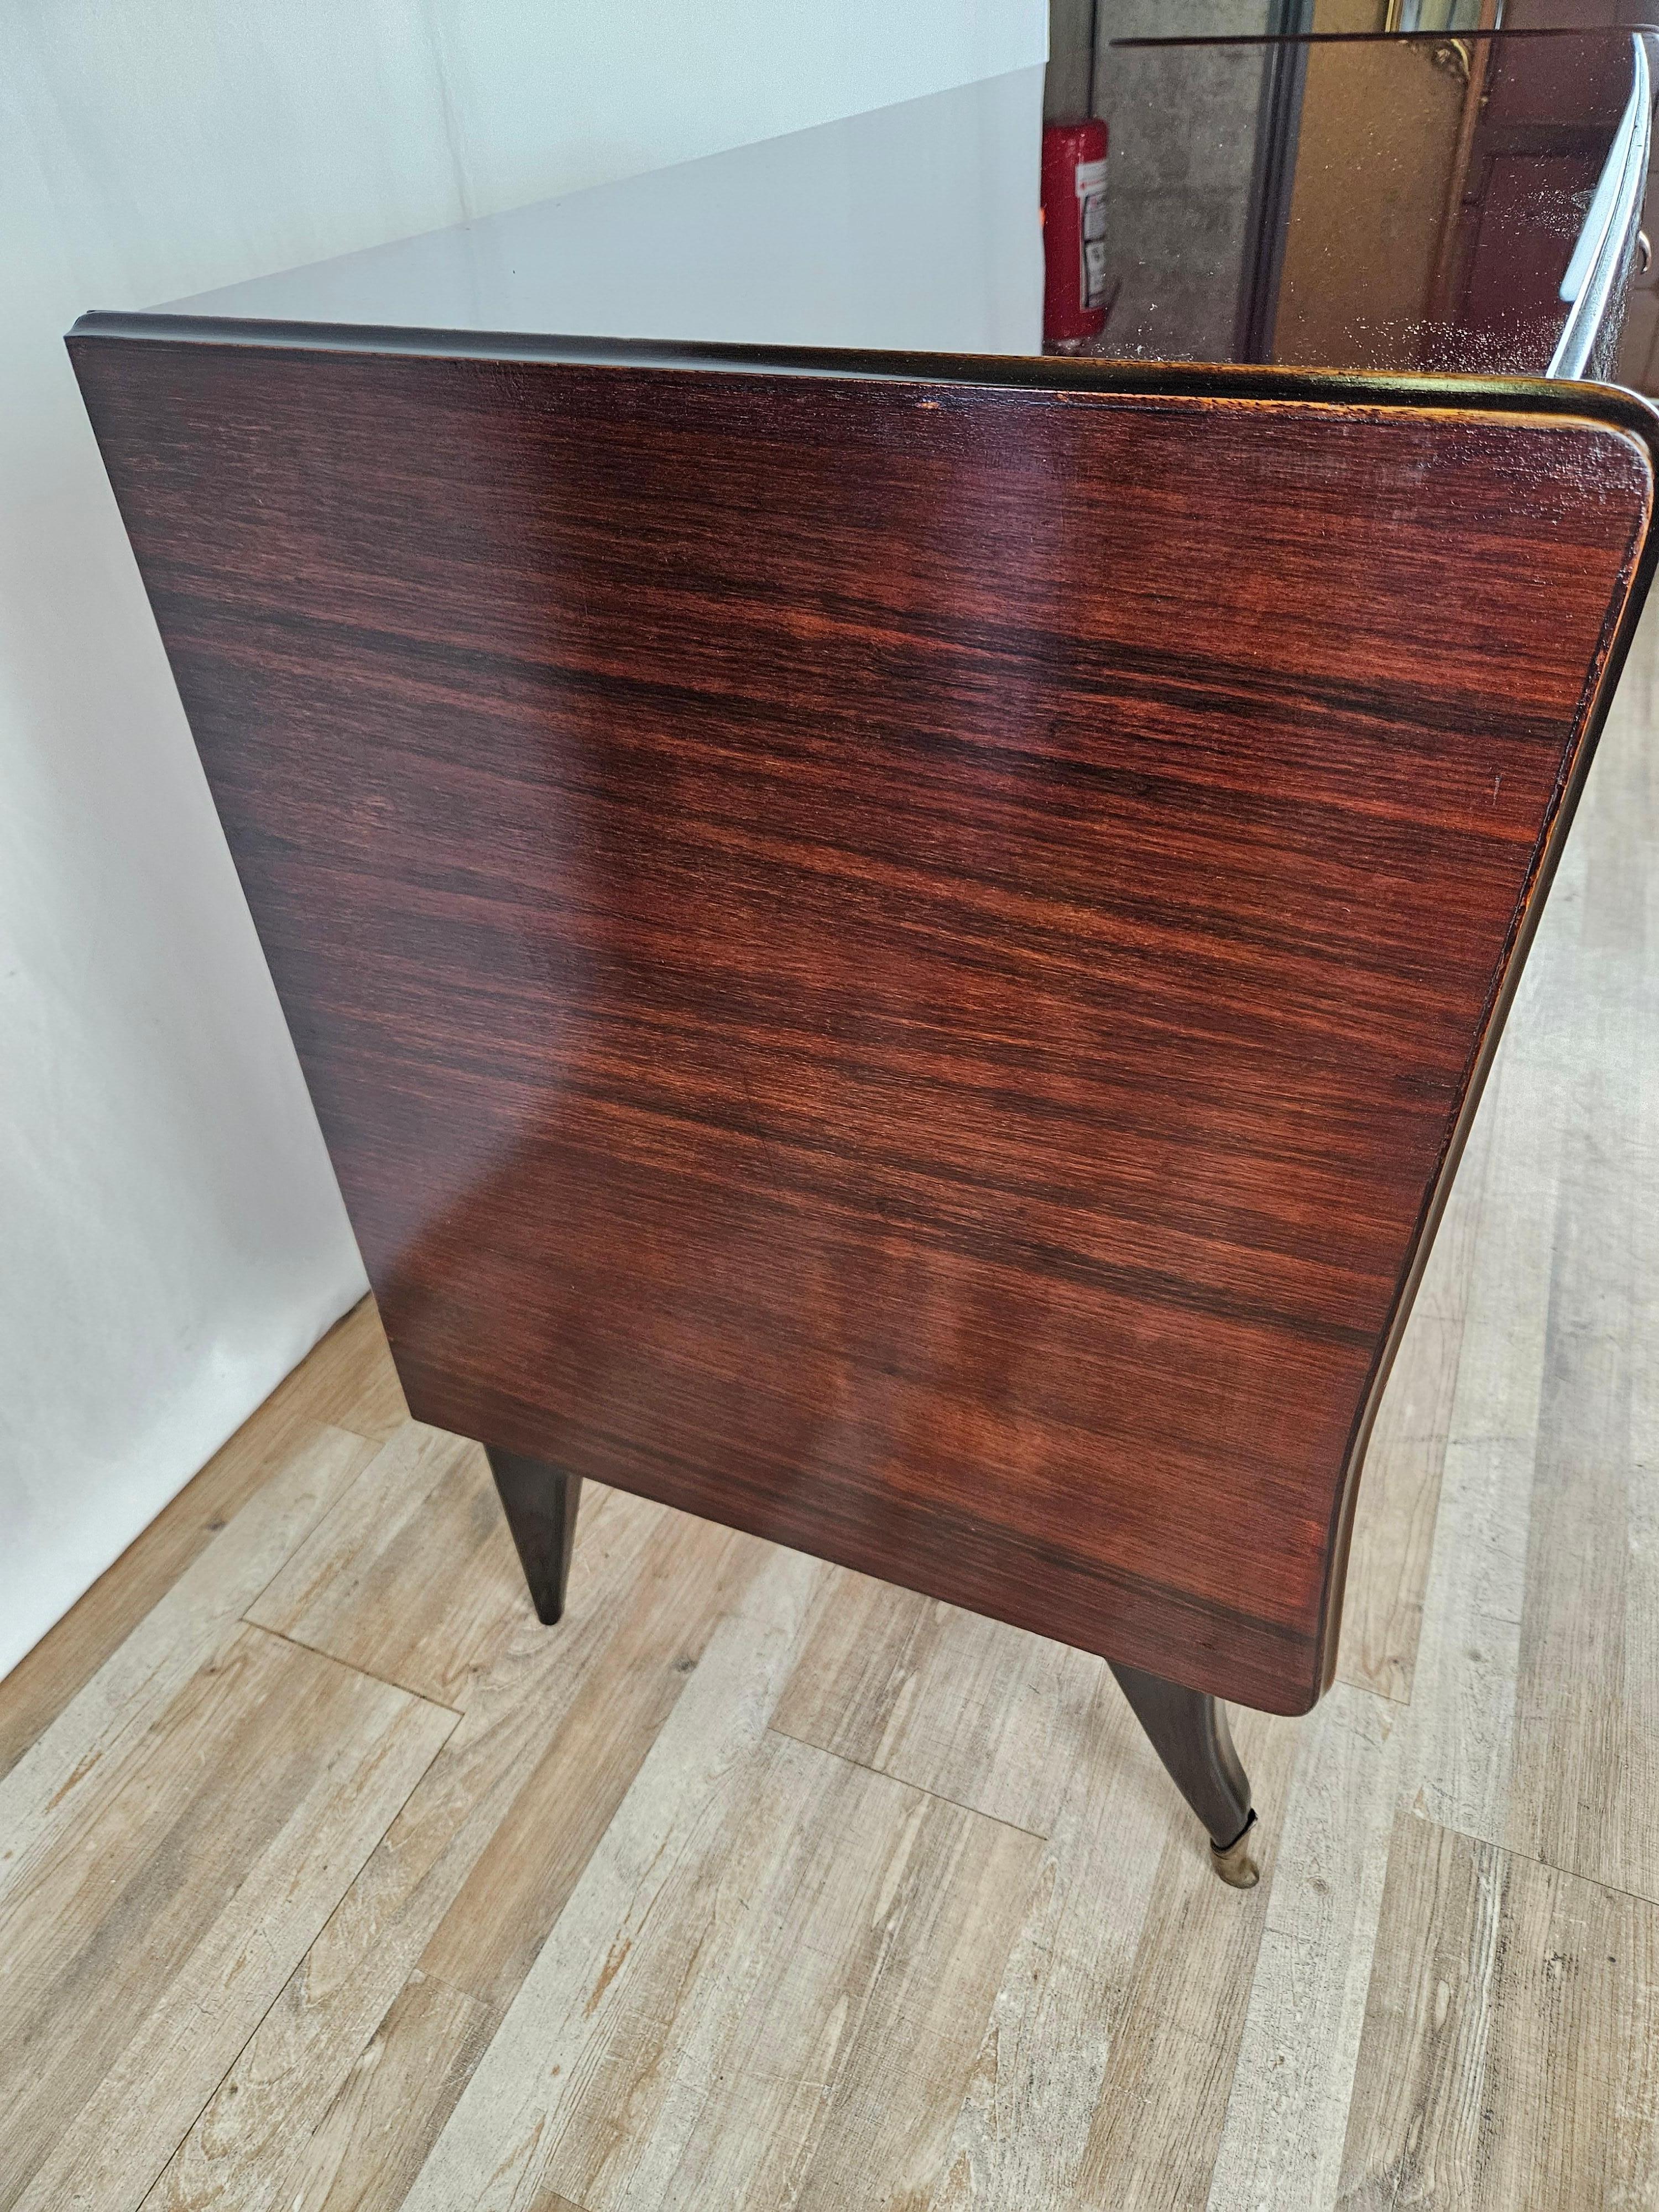 Refined 1950s Art Deco chest of drawers or sideboard upholstered in mahogany burl with carved profiles and rose brass bow handles.

The burgundy glass top is vintage original, note the soft and elegant line that makes the furniture piece a modern